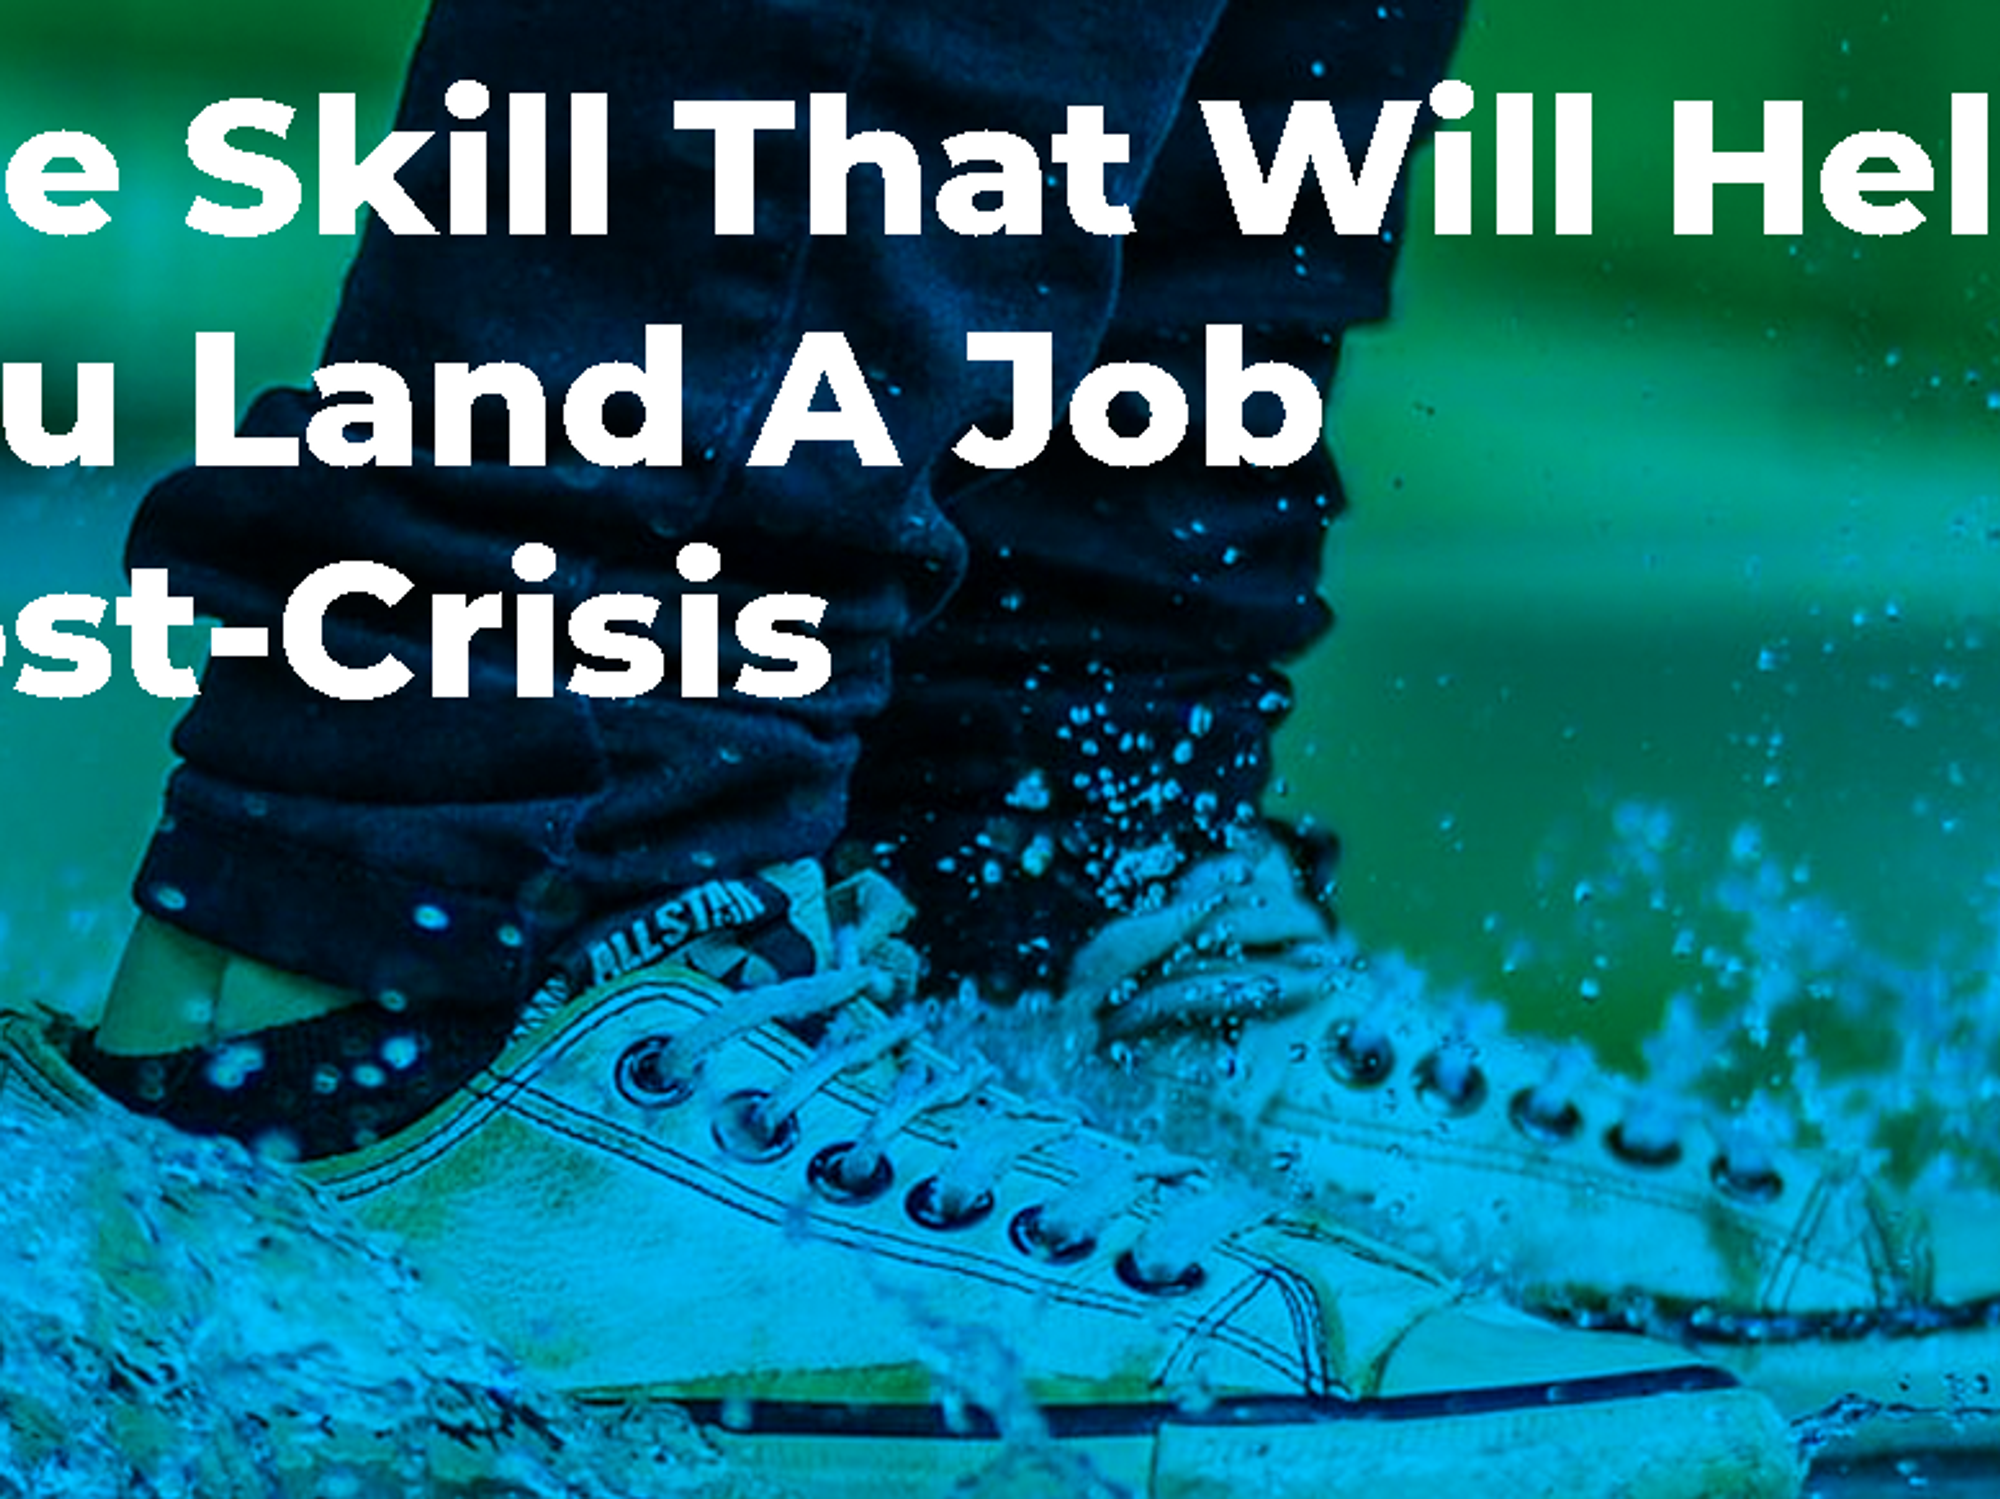 The Skill That Will Help You Land A Job Post Crisis